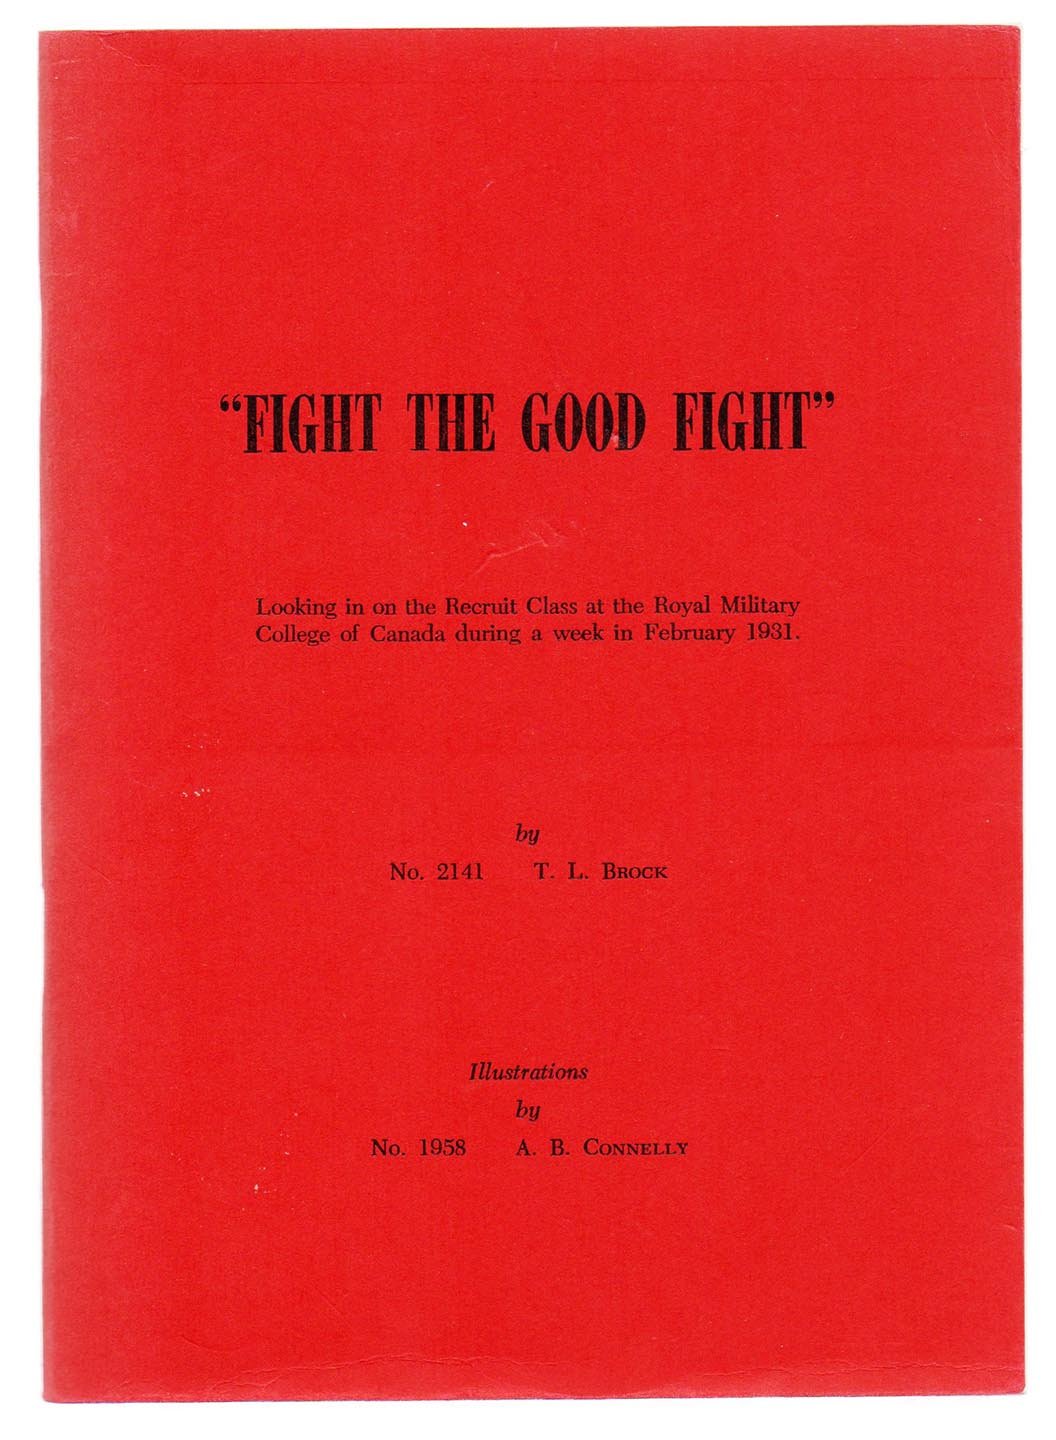 Fight The Good Fight: Looking in on the Recruit Class at the Royal Military College of Canada during a week in February 1931